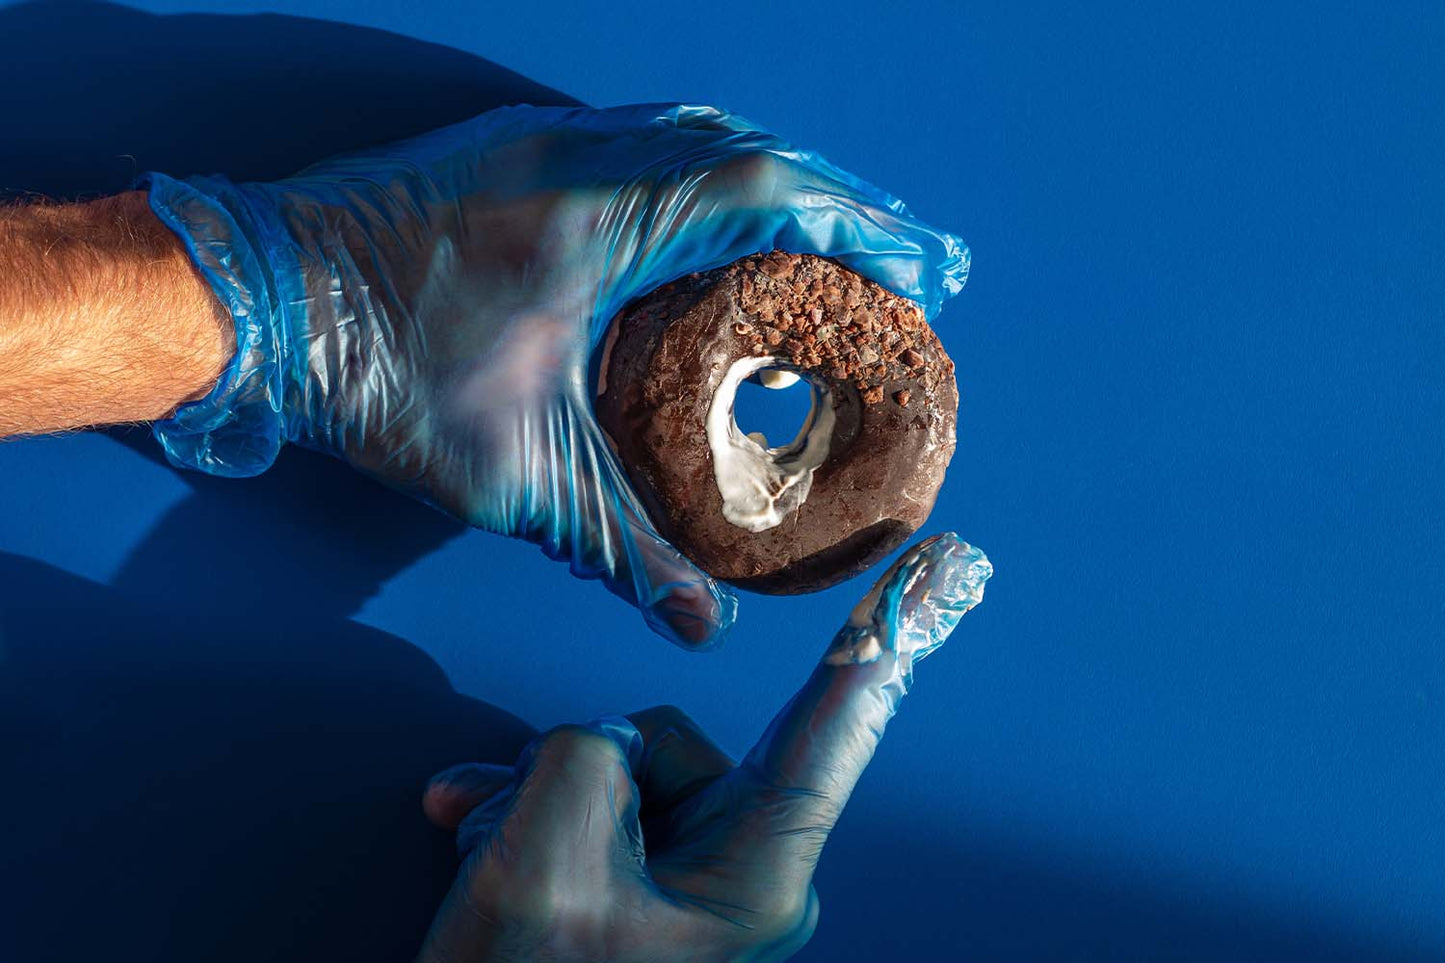 Man holding a chocolate donut that represents a rectum